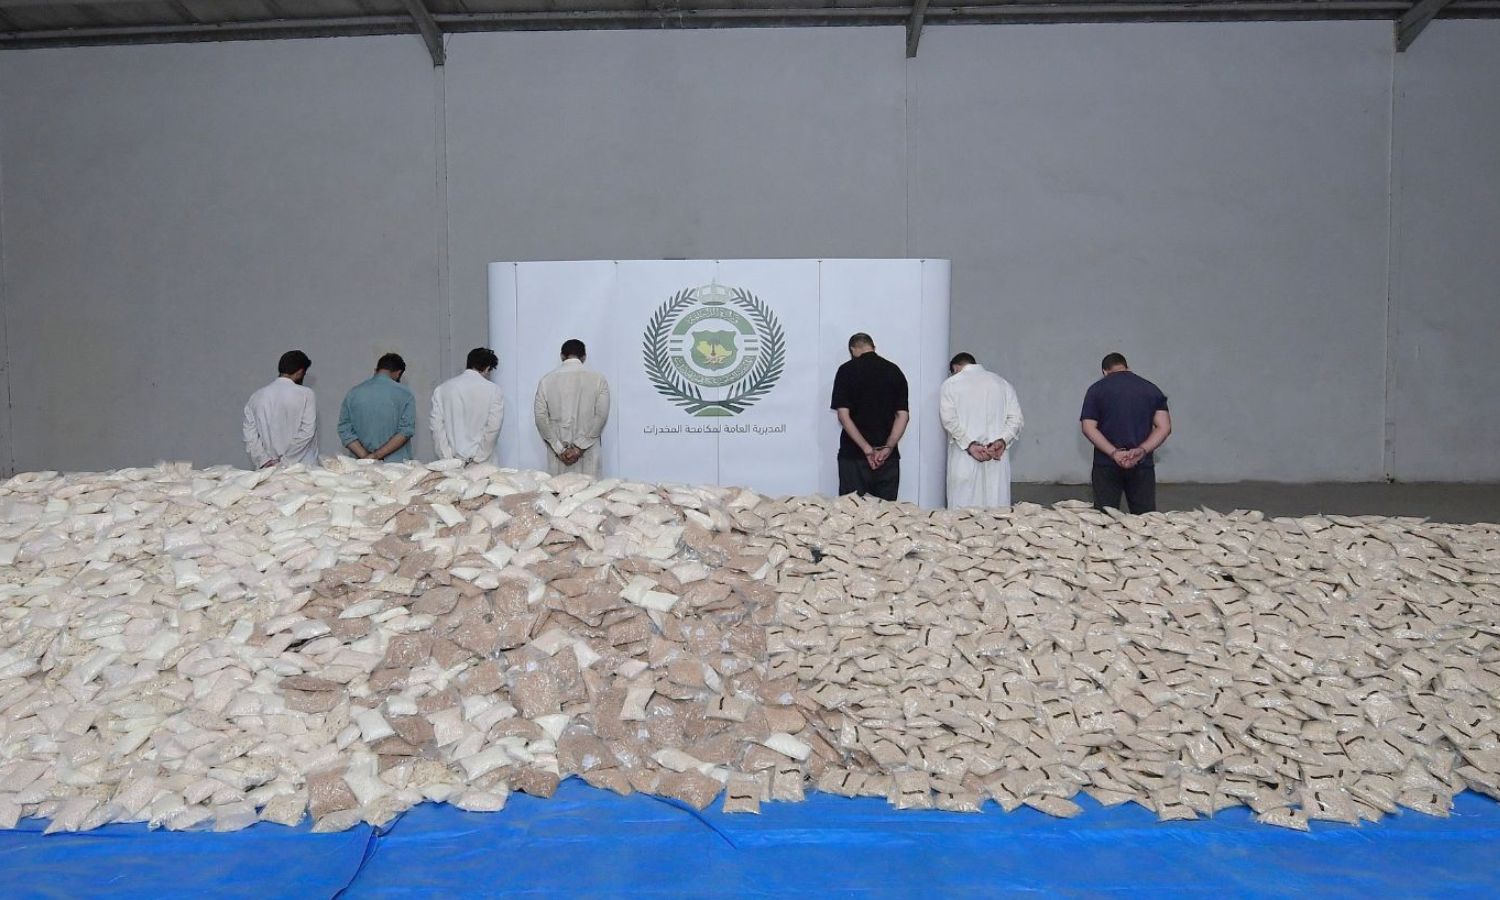 Tons of amphetamine tablets seized by the Saudi authorities were hidden inside a shipment of flour - August 31, 2022 (Twitter/General Directorate for Drug Control)